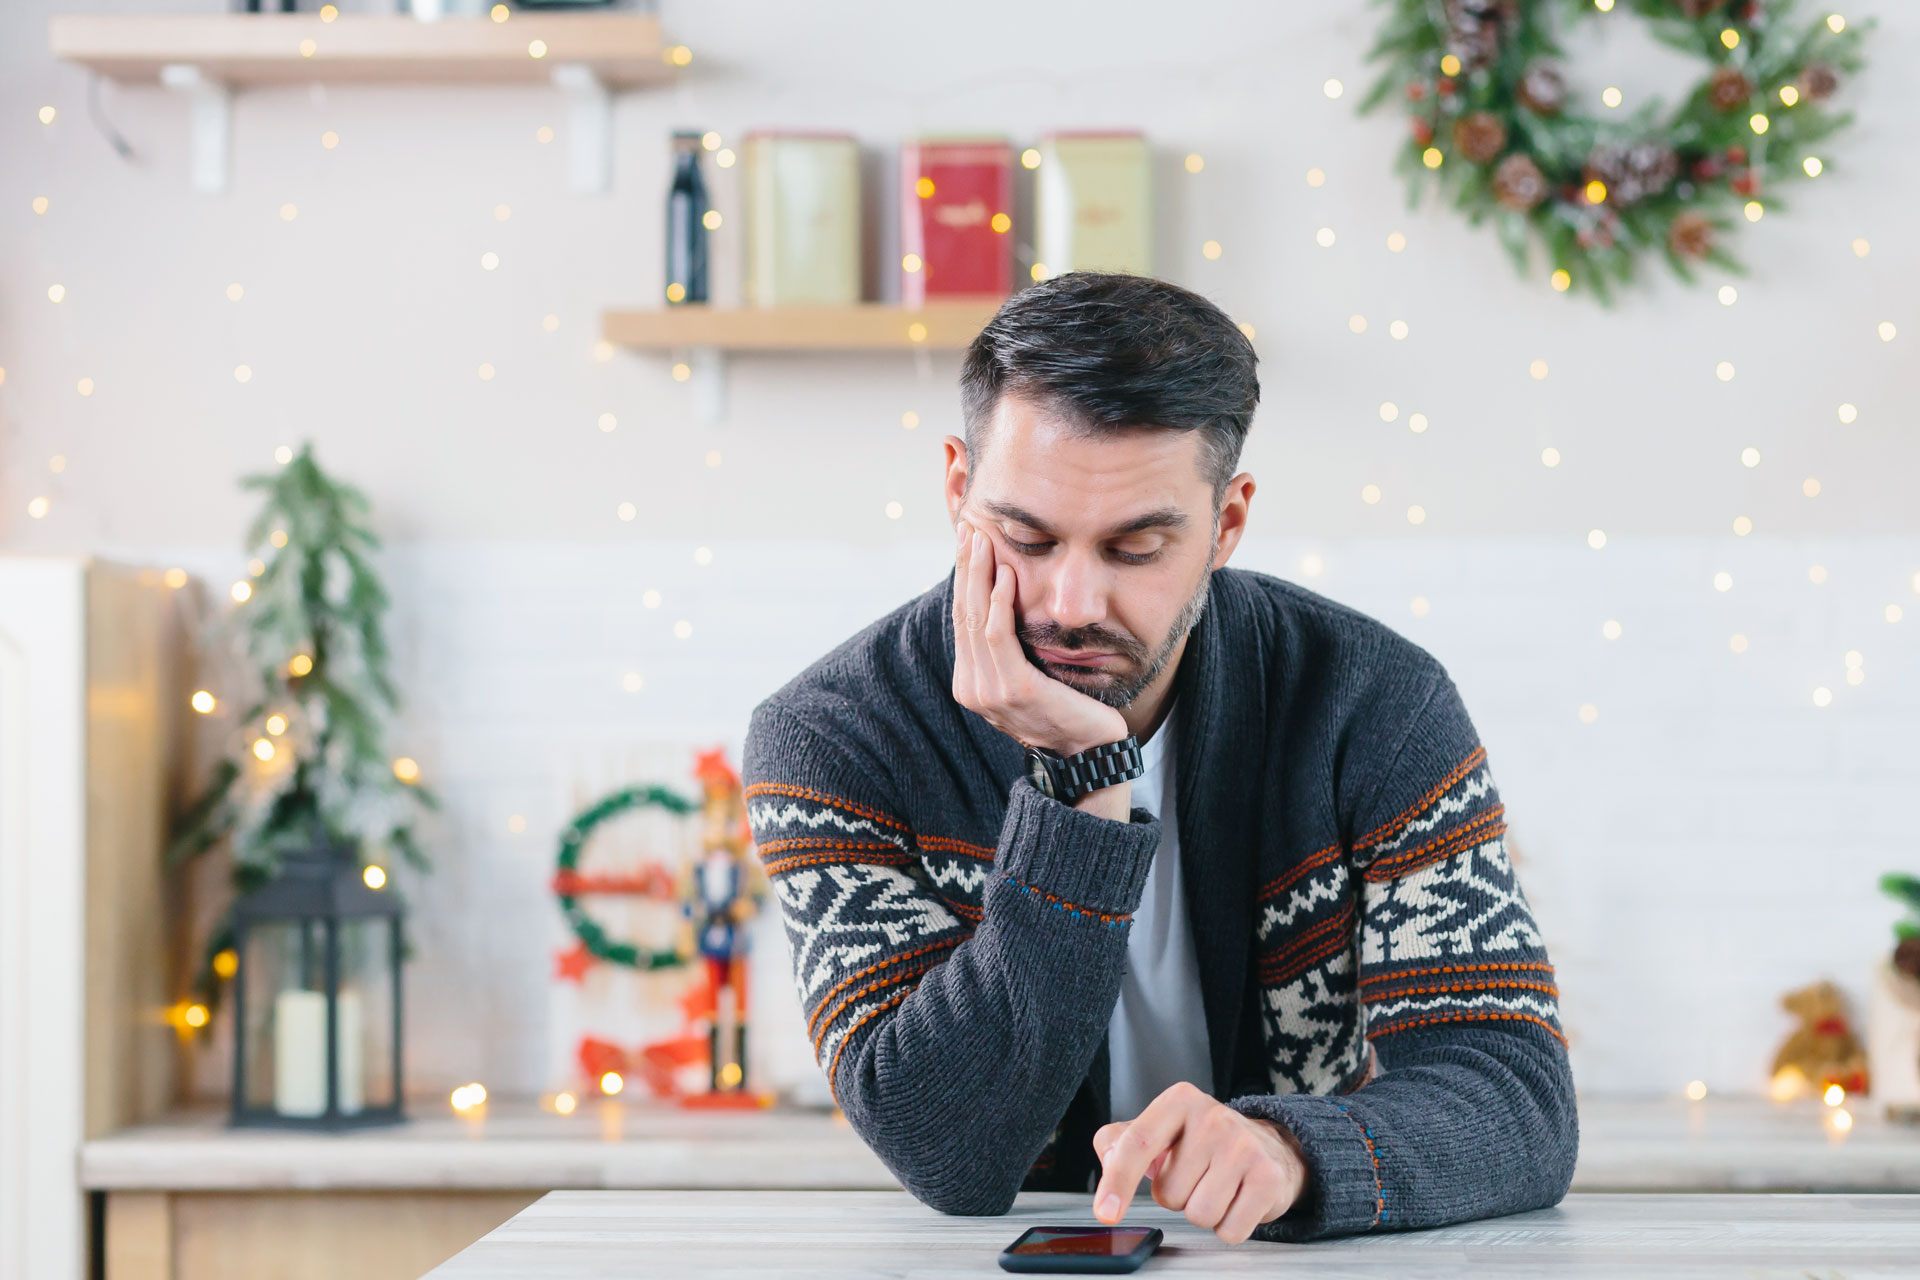 Behavioral Health solutions that help manage stress associated with the holidays